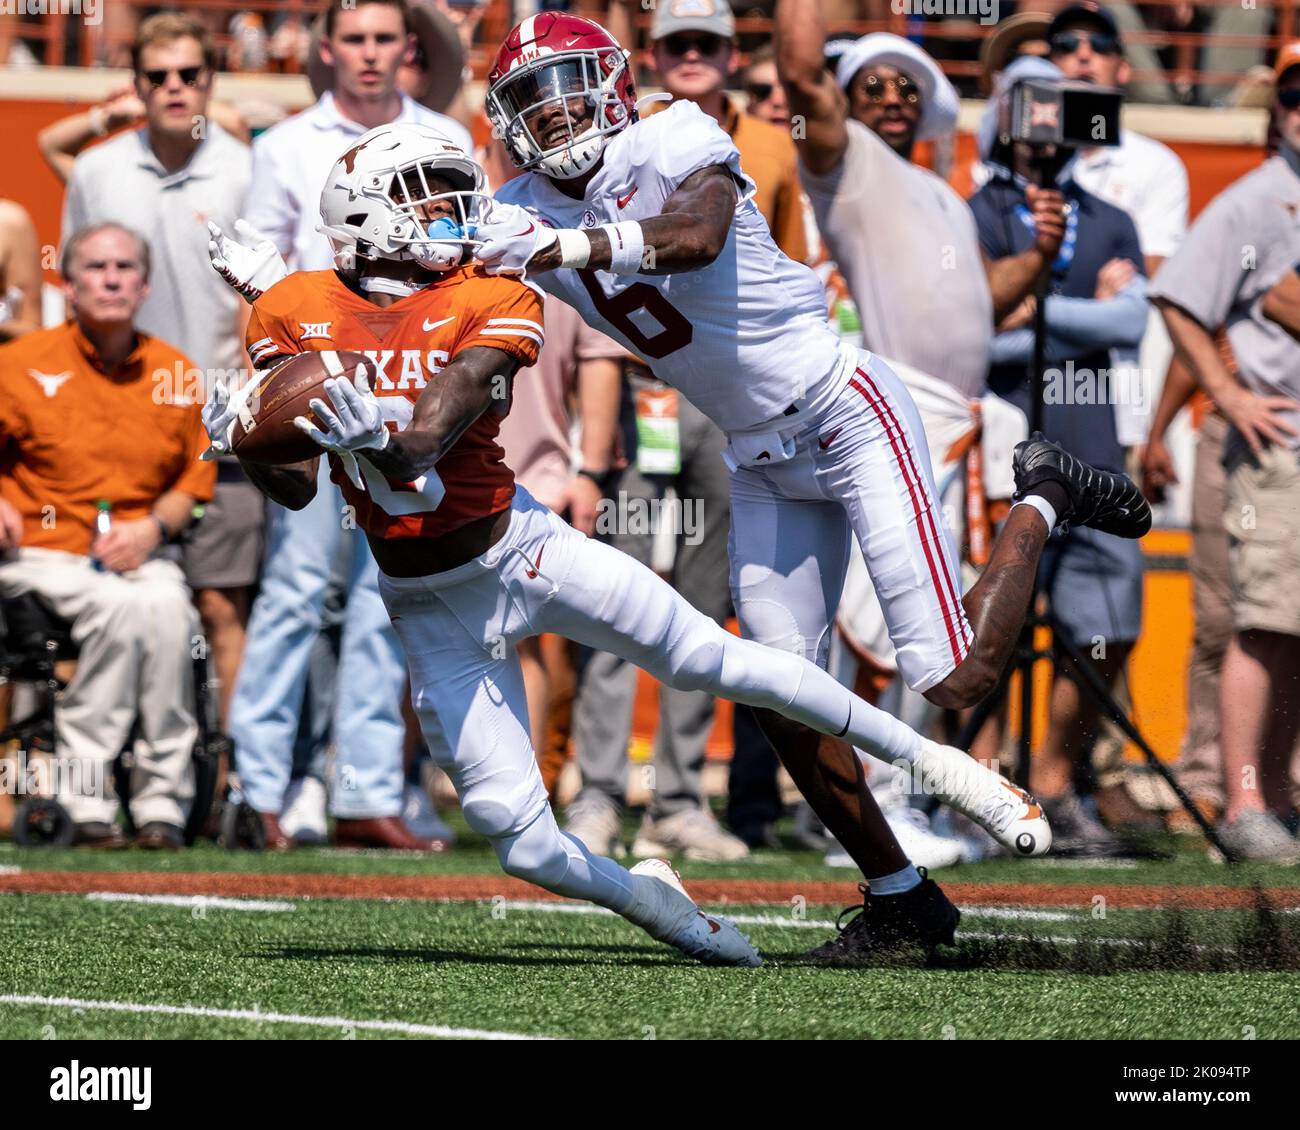 September 10, 2022. TE JaÕTavion Sanders #0 of the Texas Longhorns in action vs the Alabama Crimson Tide at DKR-Memorial Stadium. Texas and Alabama are tied 10-10 at the half. Stock Photo